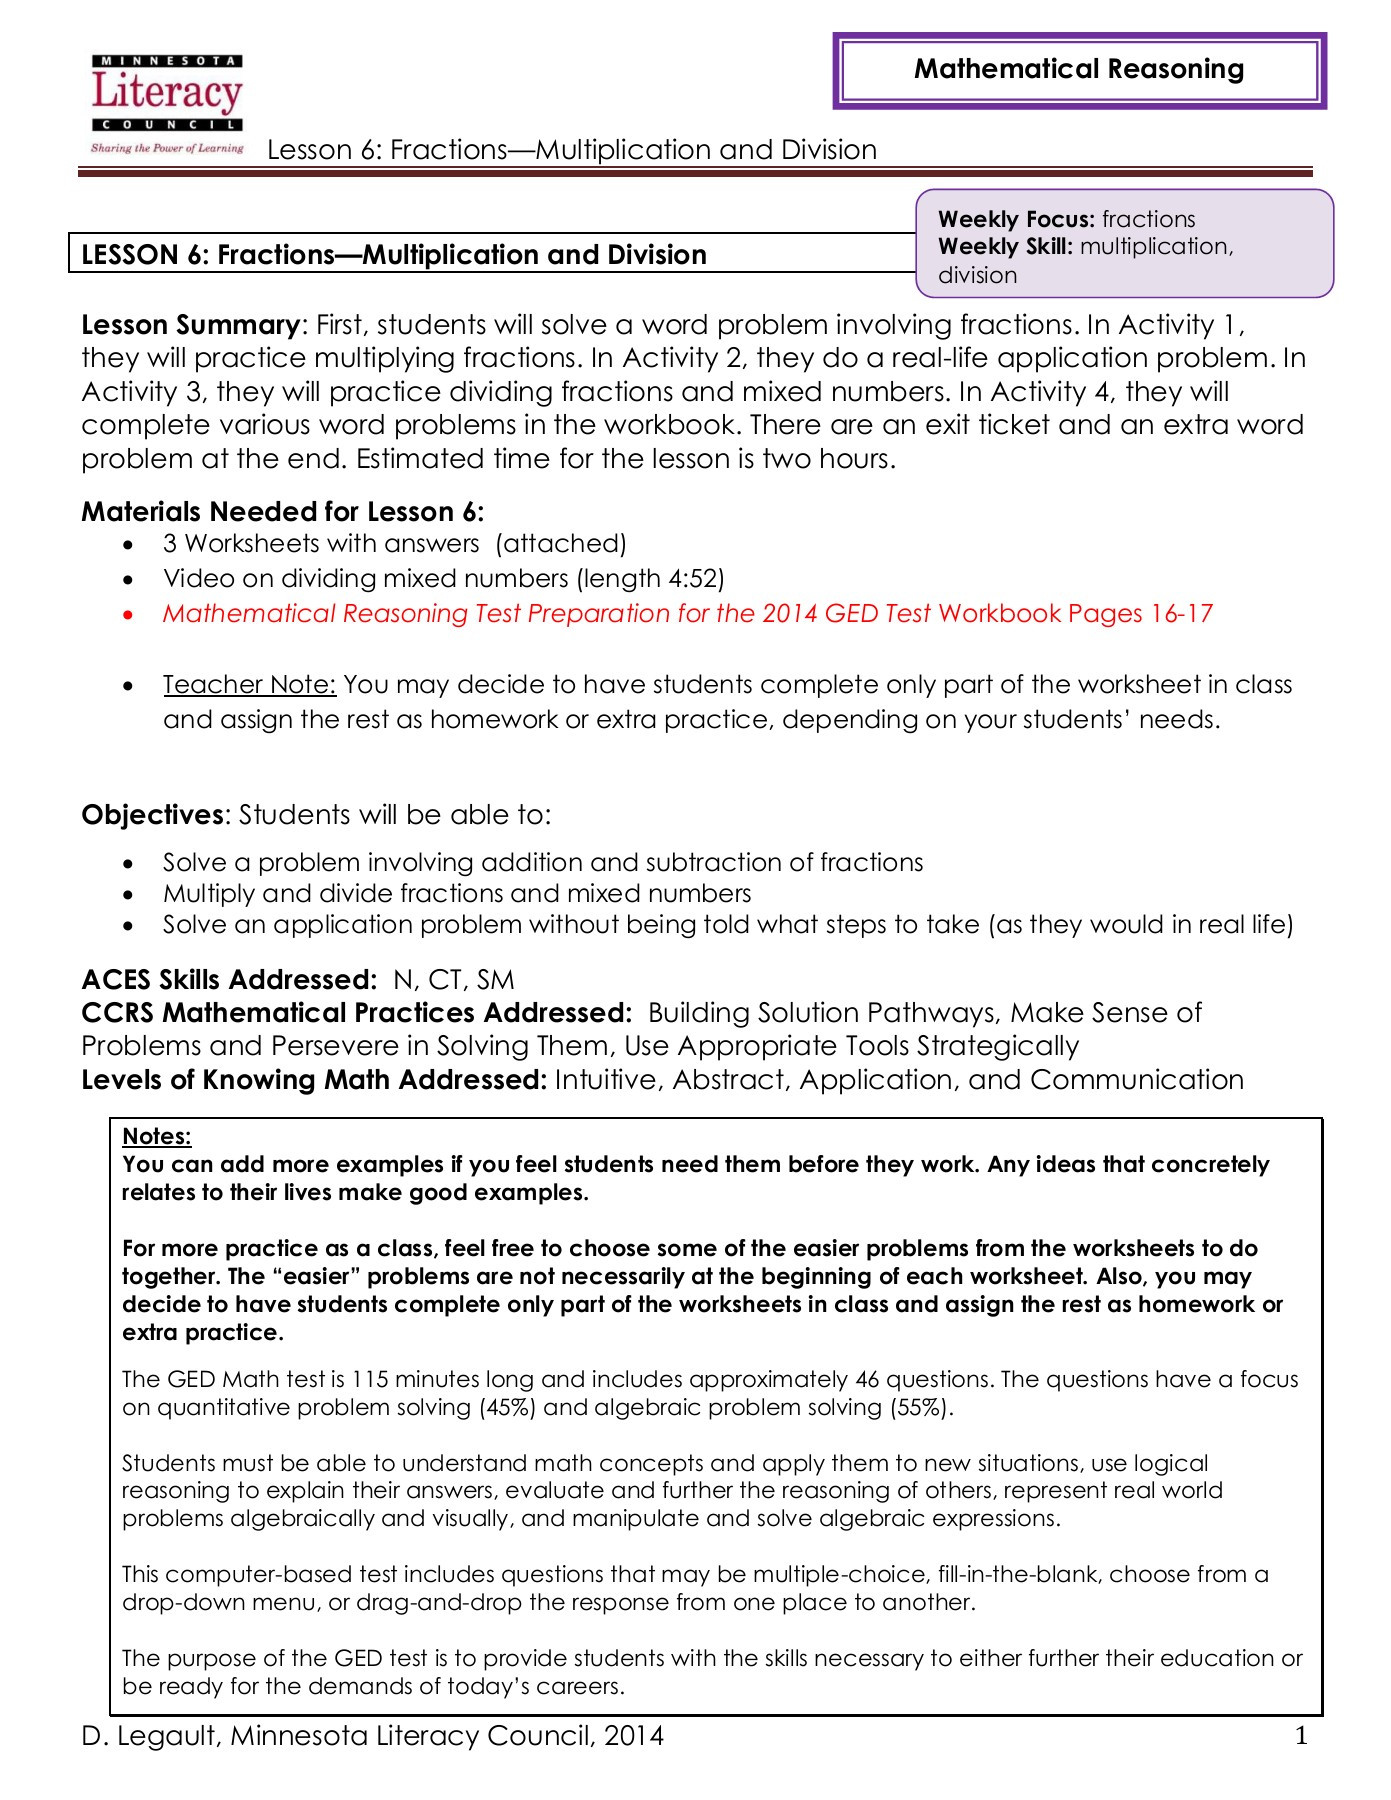 Dividing Fractions Word Problems Worksheet Lesson 6 Fractions Multiplication and Division Pages 1 12